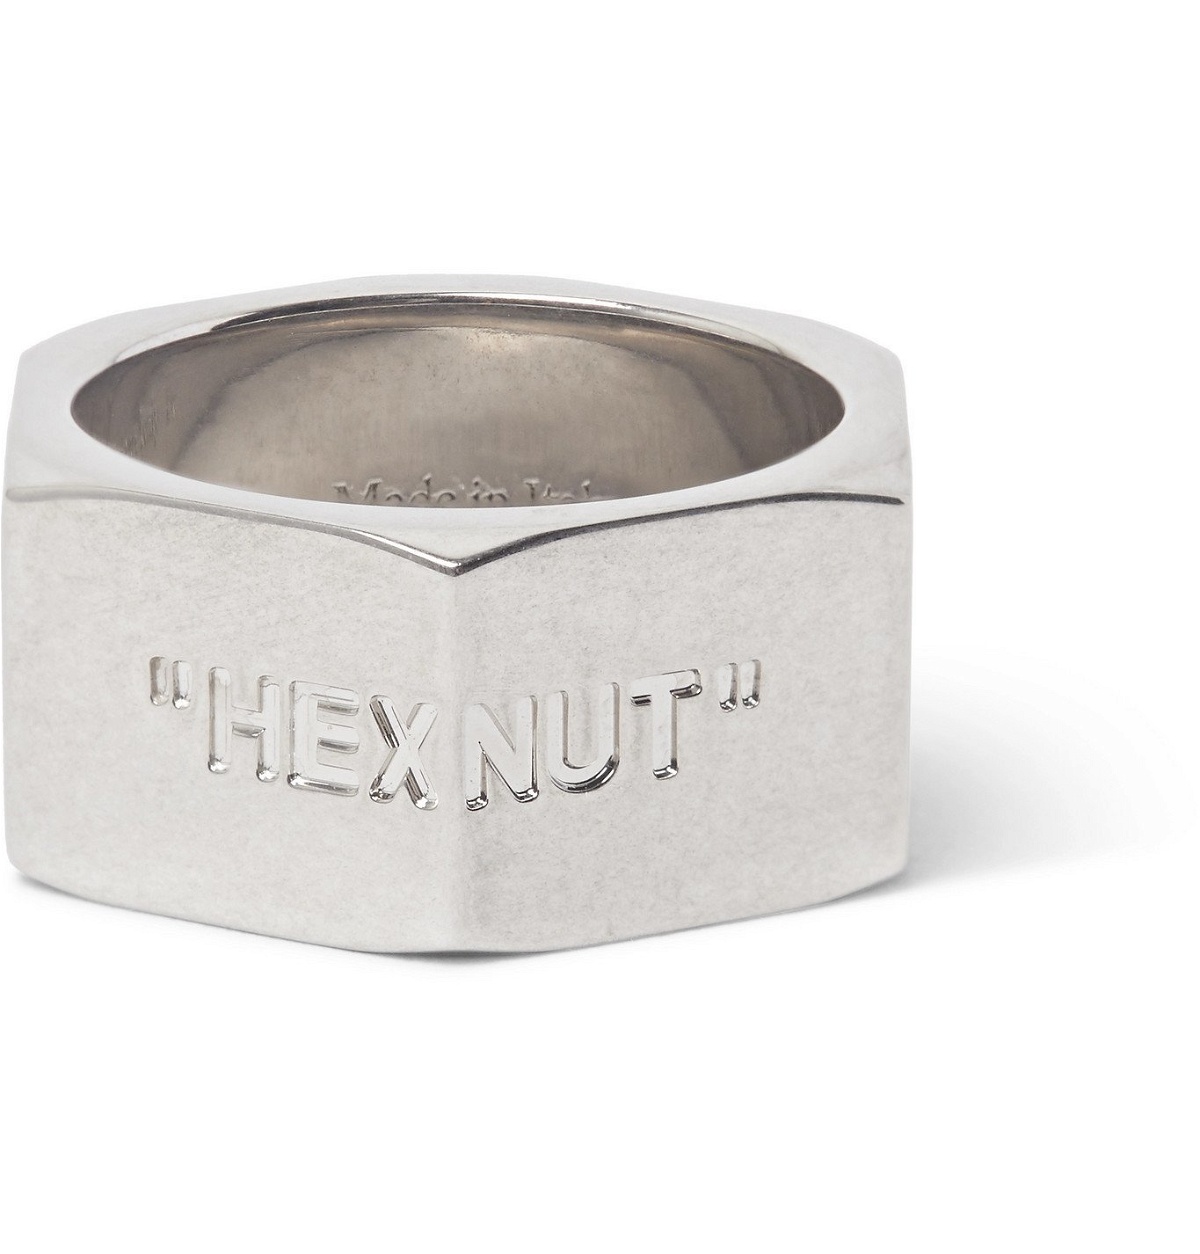 Off-White - Hex Nut Large Silver-Tone Ring - Silver Off-White